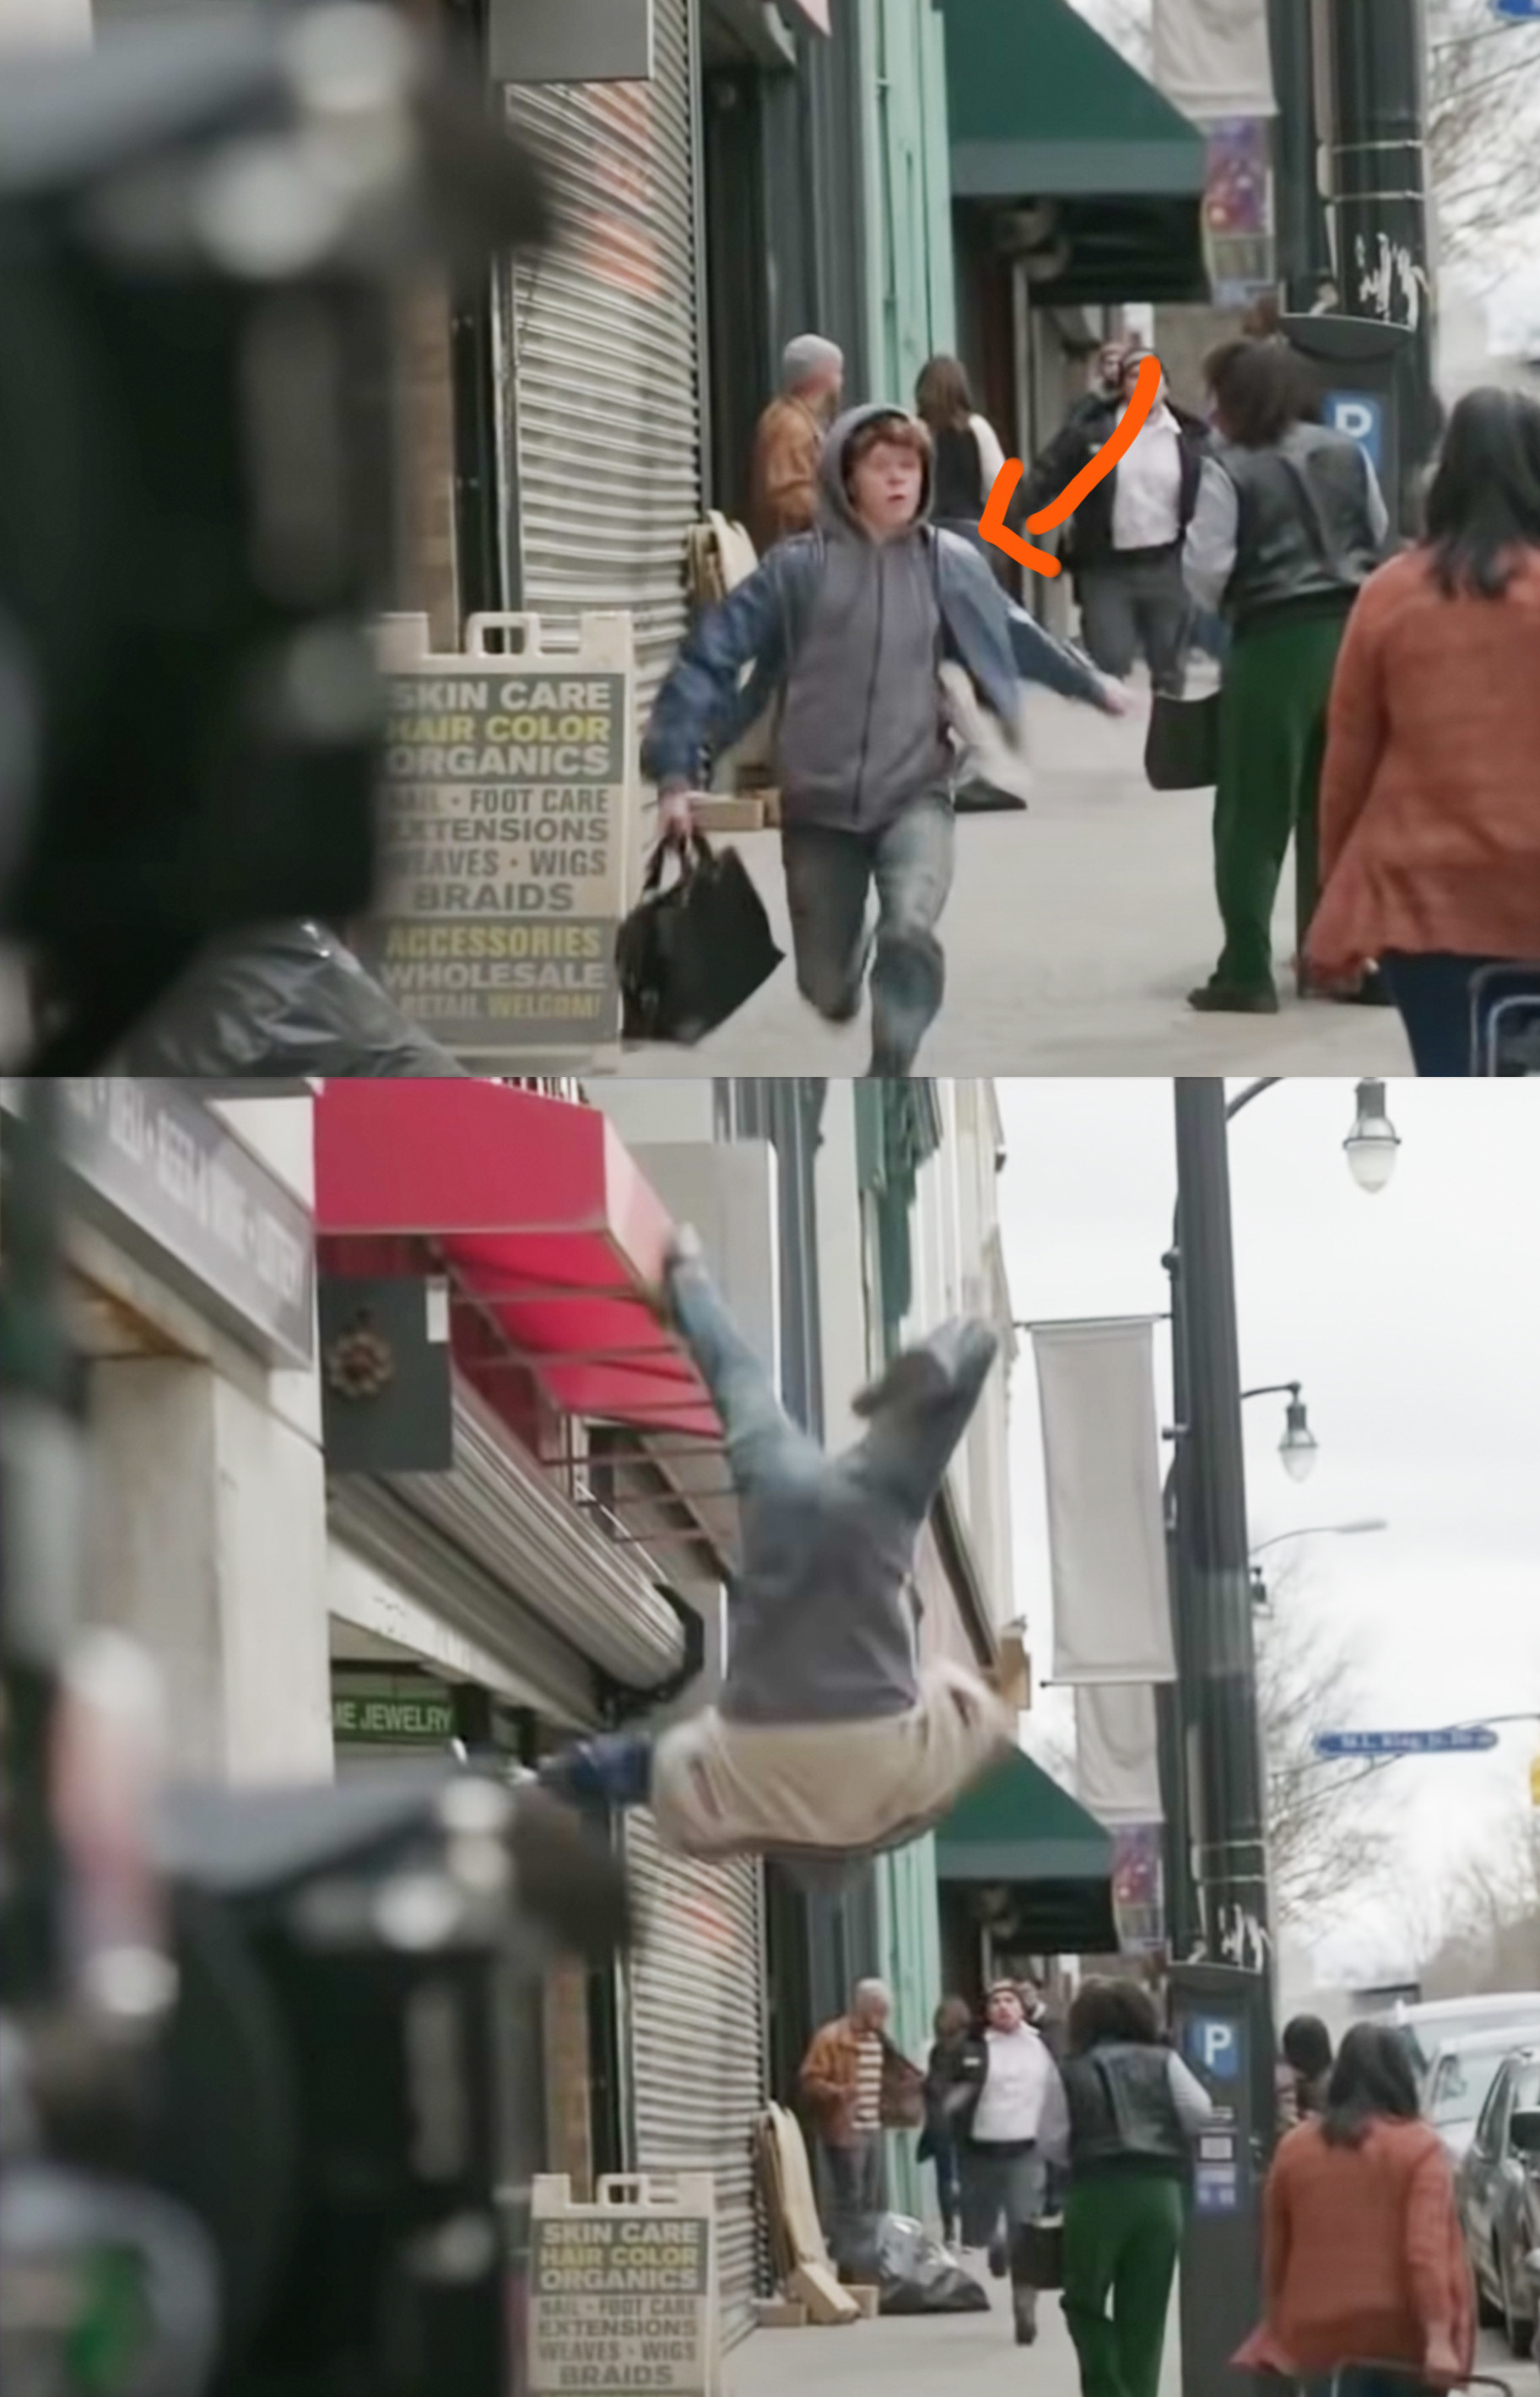 Harry running down the street and then ending up hanging upside down